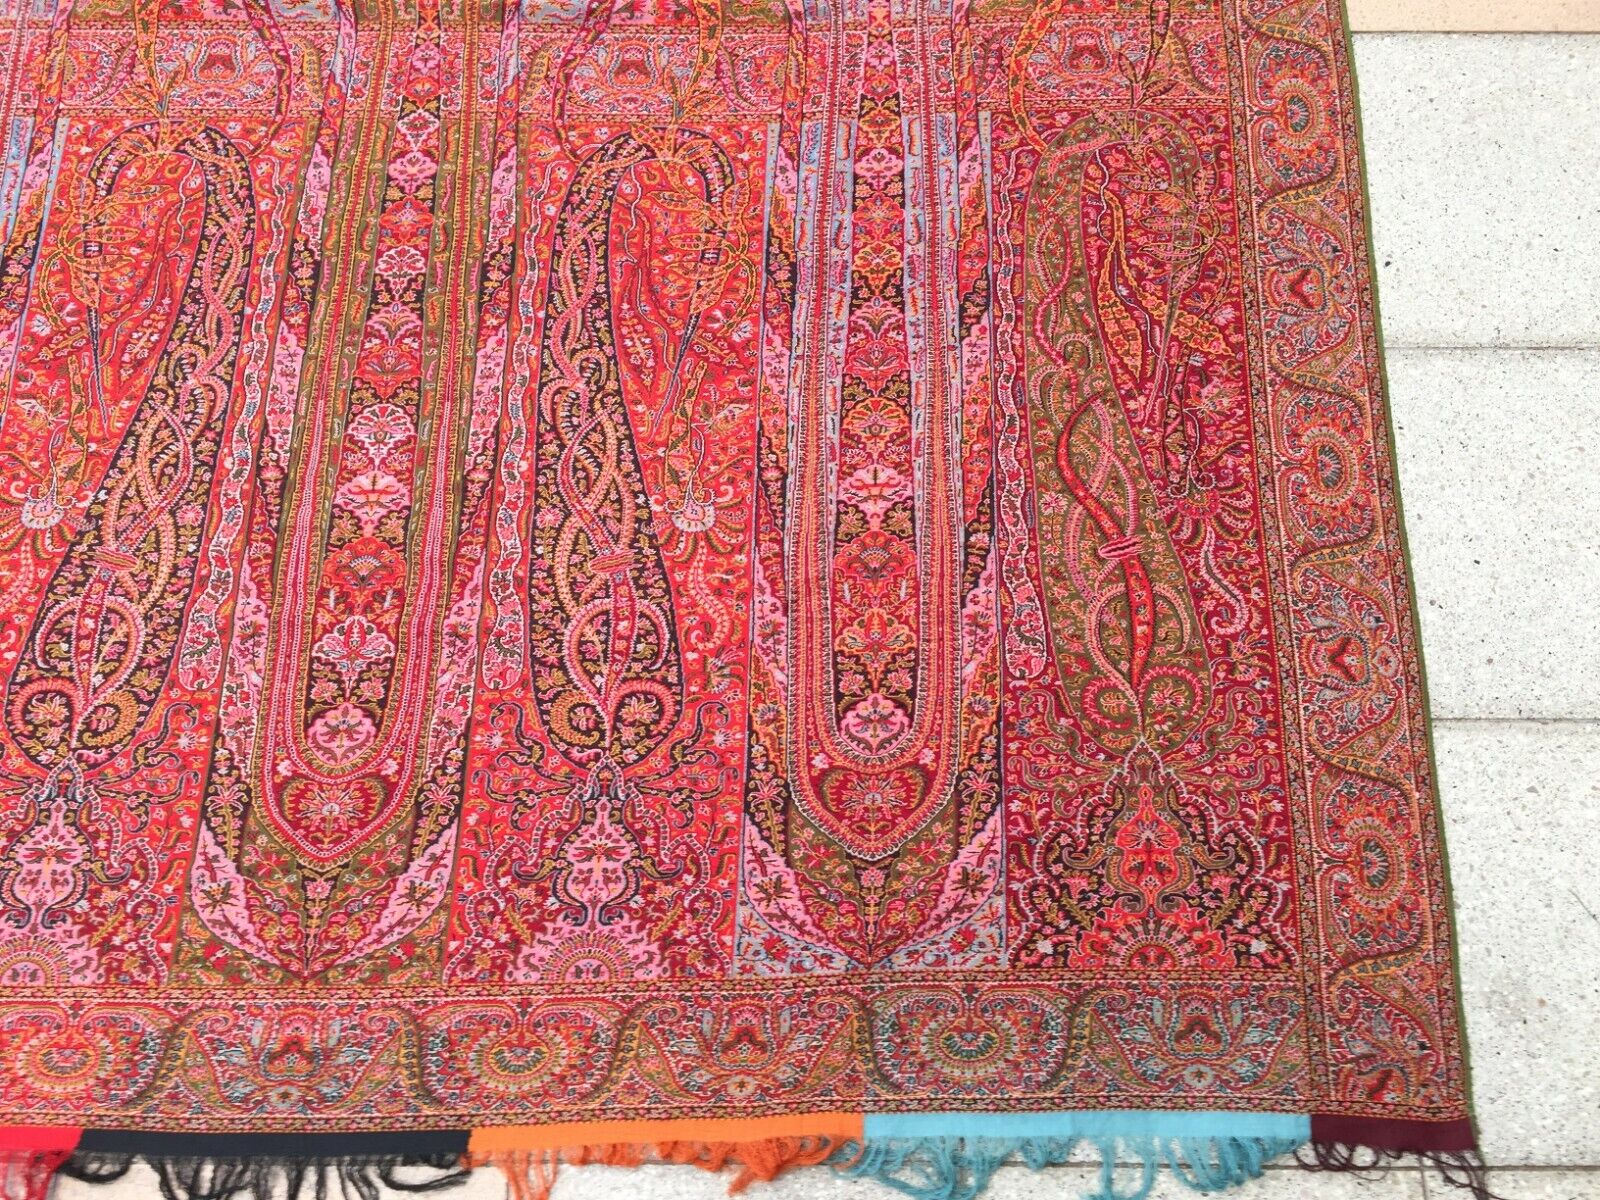 Vibrant Red Color Creating a Striking Backdrop on Handmade Antique Kashmir Shawl - 1870s